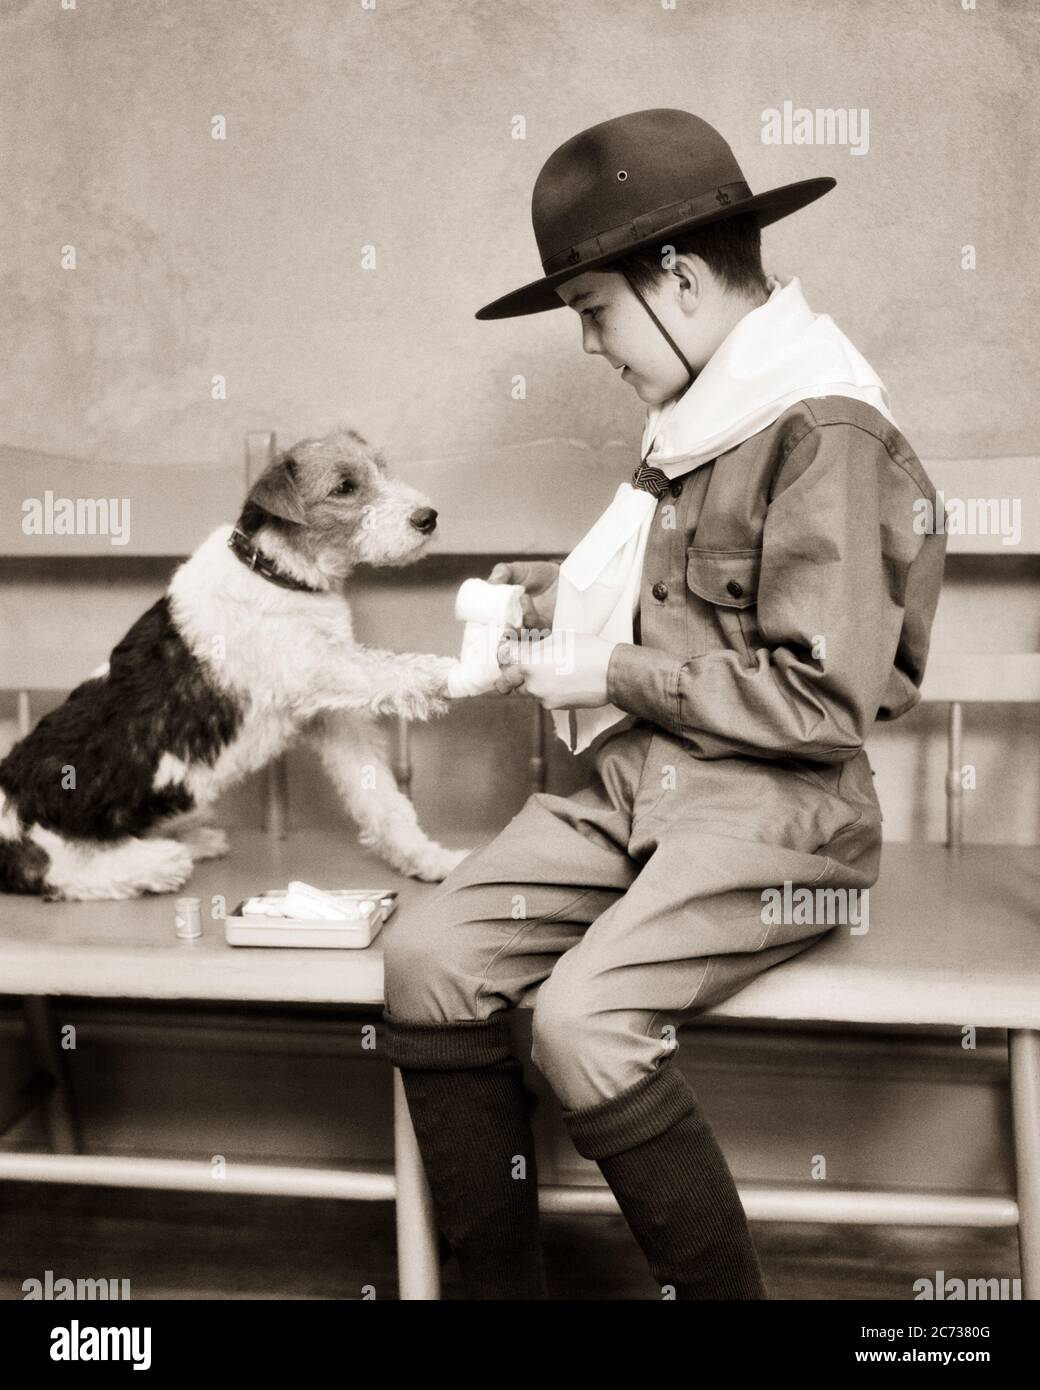 1920s A PREPARED BOY SCOUT IN UNIFORM GIVING FIRST AID TO INJURED WIRE HAIRED TERRIER DOG WRAPPING BANDAGE ON PAW - d1868 HAR001 HARS B&W TERRIER MAMMALS CHEERFUL ASSISTANCE CANINES LEADERSHIP PAW HAIRED HURT TREATMENT POOCH BOY SCOUT CONNECTION THRIFTY COURTEOUS FRIENDLY HELPFUL KIND REVERENT STYLISH TRUSTWORTHY CANINE COOPERATION GROWTH JUVENILES LOYAL MAMMAL PRE-TEEN PRE-TEEN BOY PREPARED SOLUTIONS BE PREPARED BLACK AND WHITE BRAVE CAUCASIAN ETHNICITY FIRST AID HAR001 OBEDIENT OLD FASHIONED Stock Photo